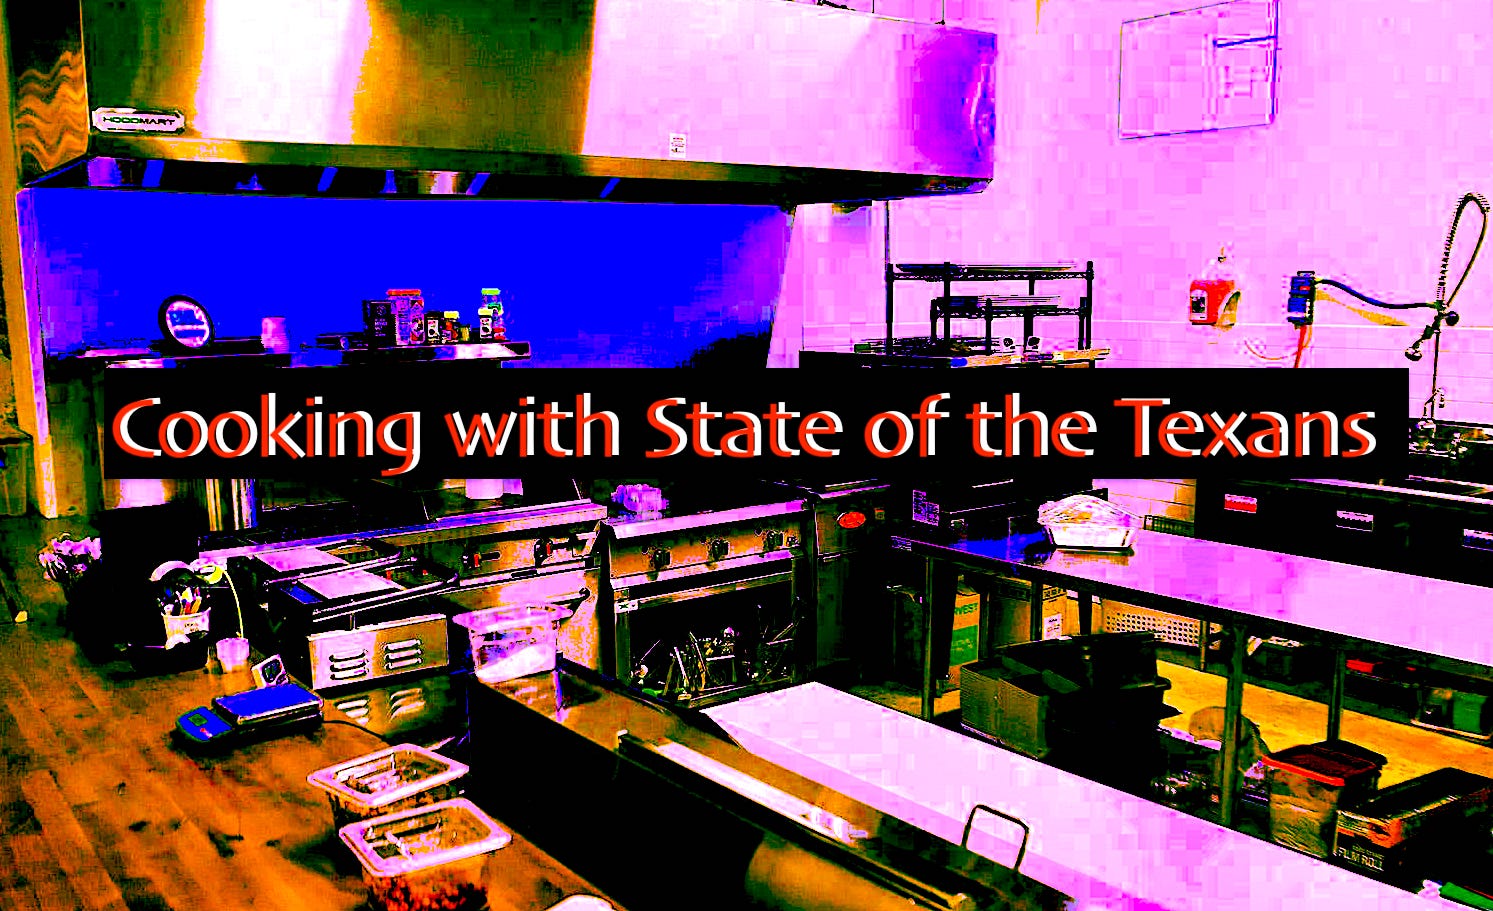 Cooking with State of the Texans